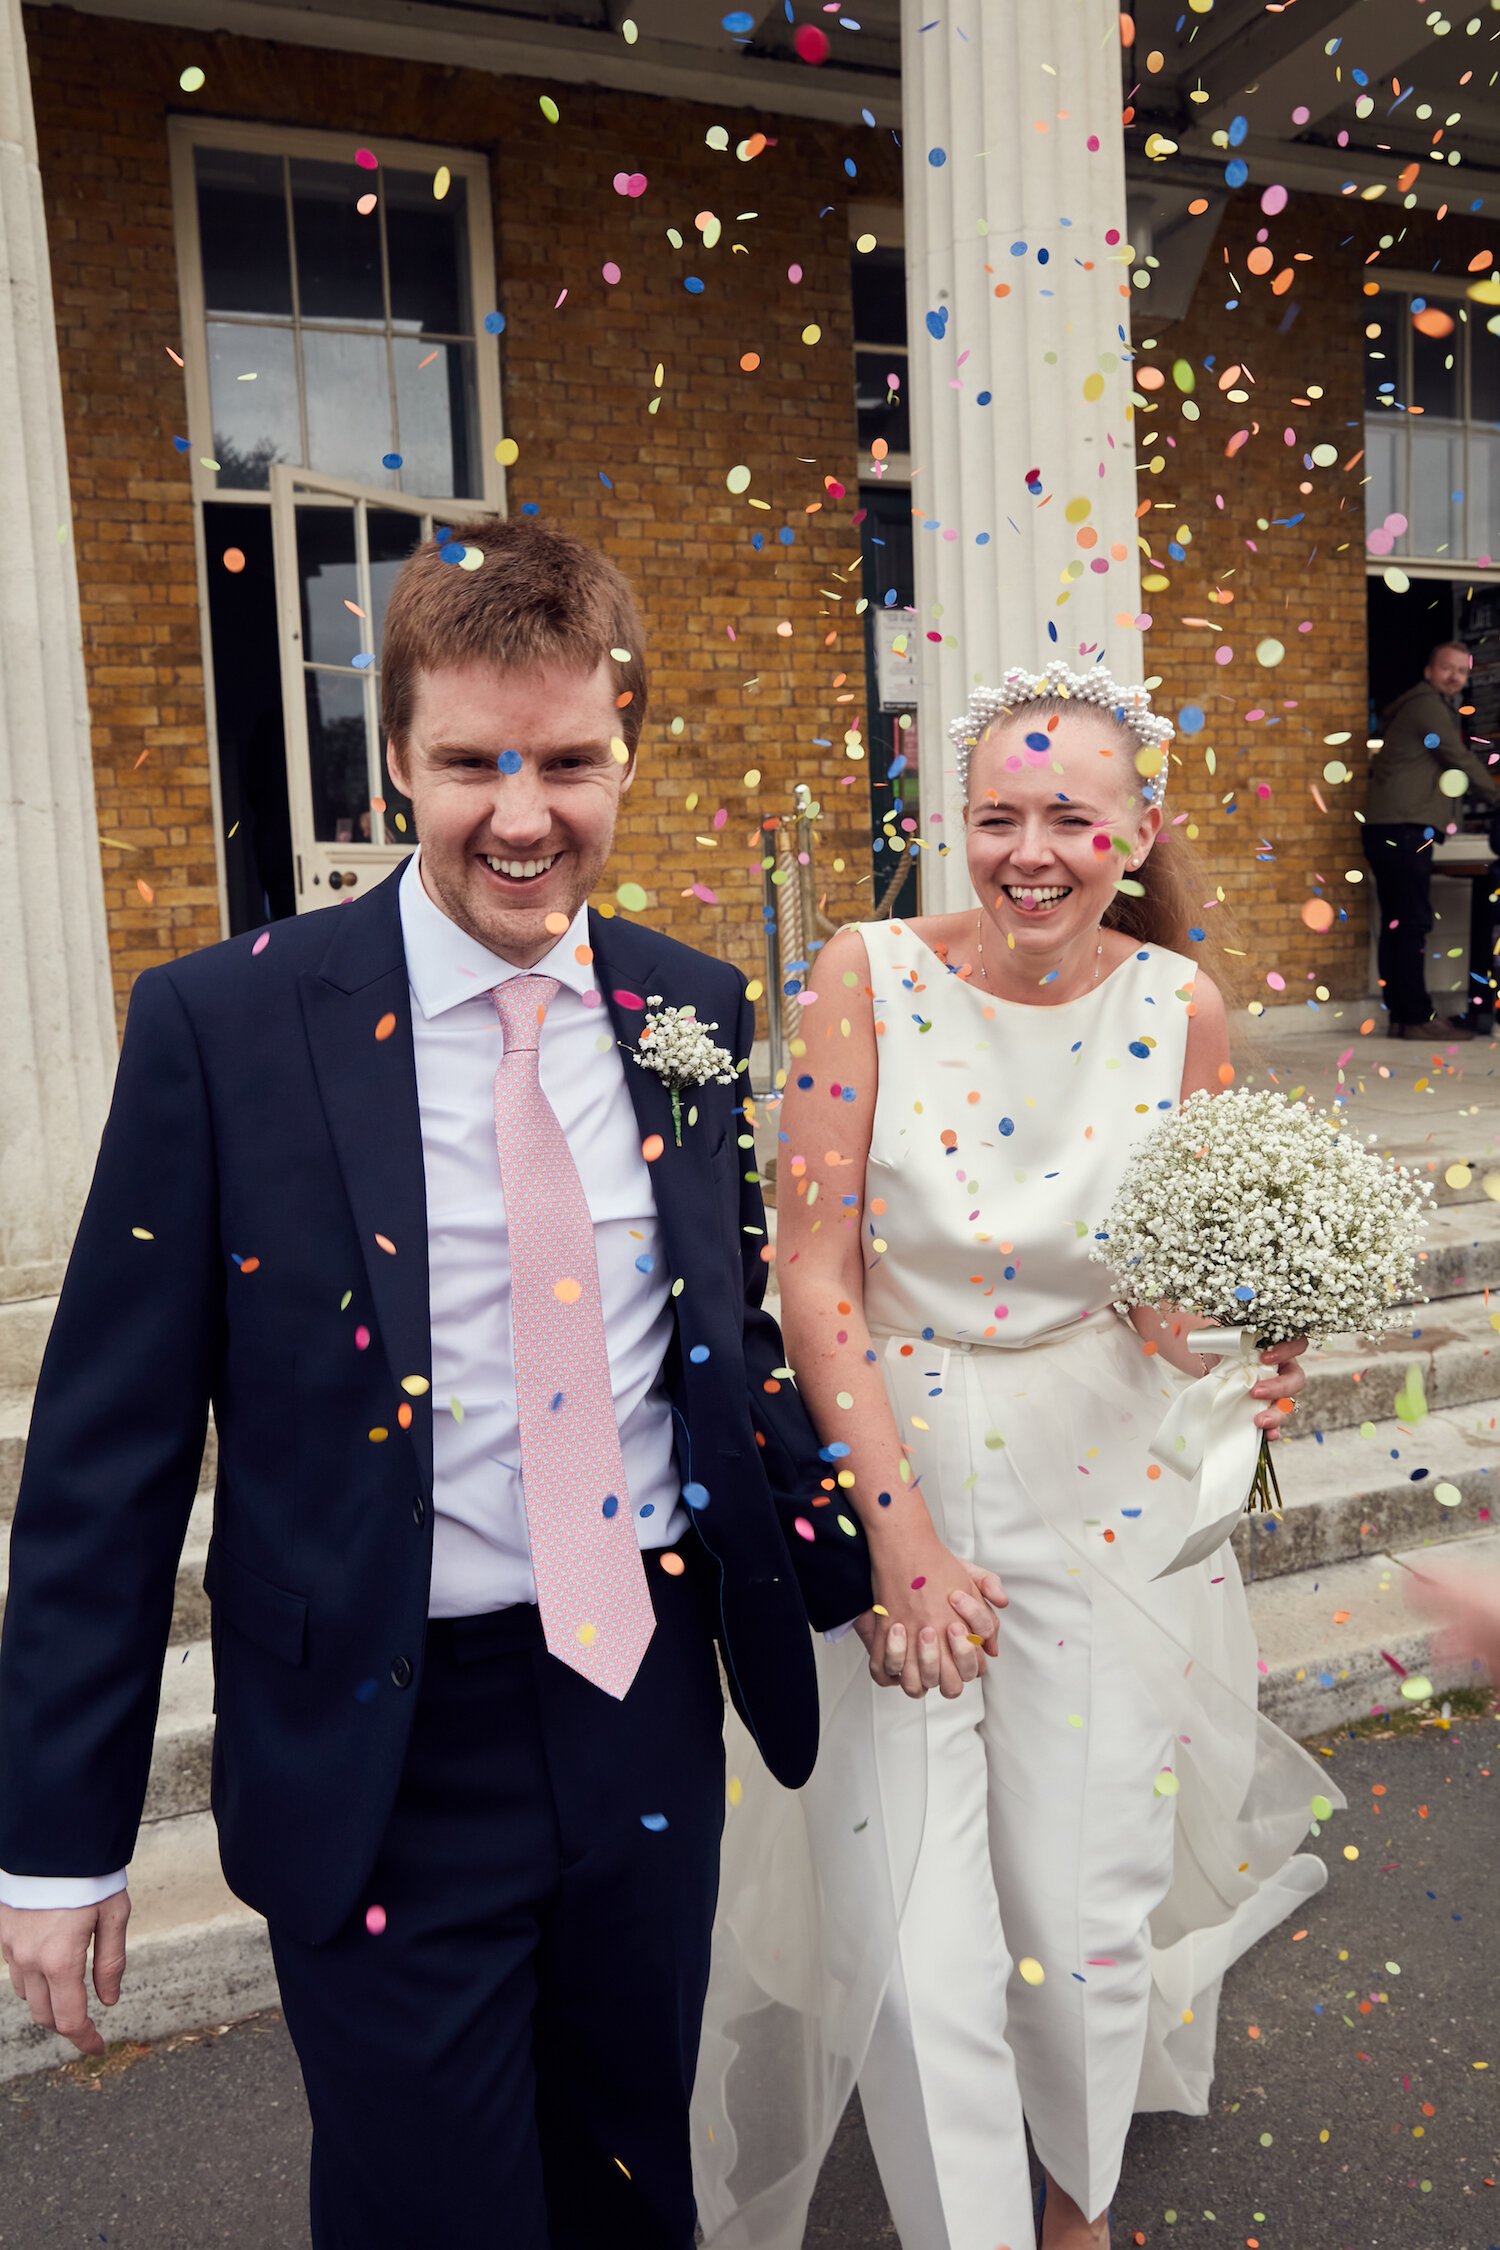 Beautiful bride Caroline wore bridal separates, trousers and an overskirt by Halfpenny London